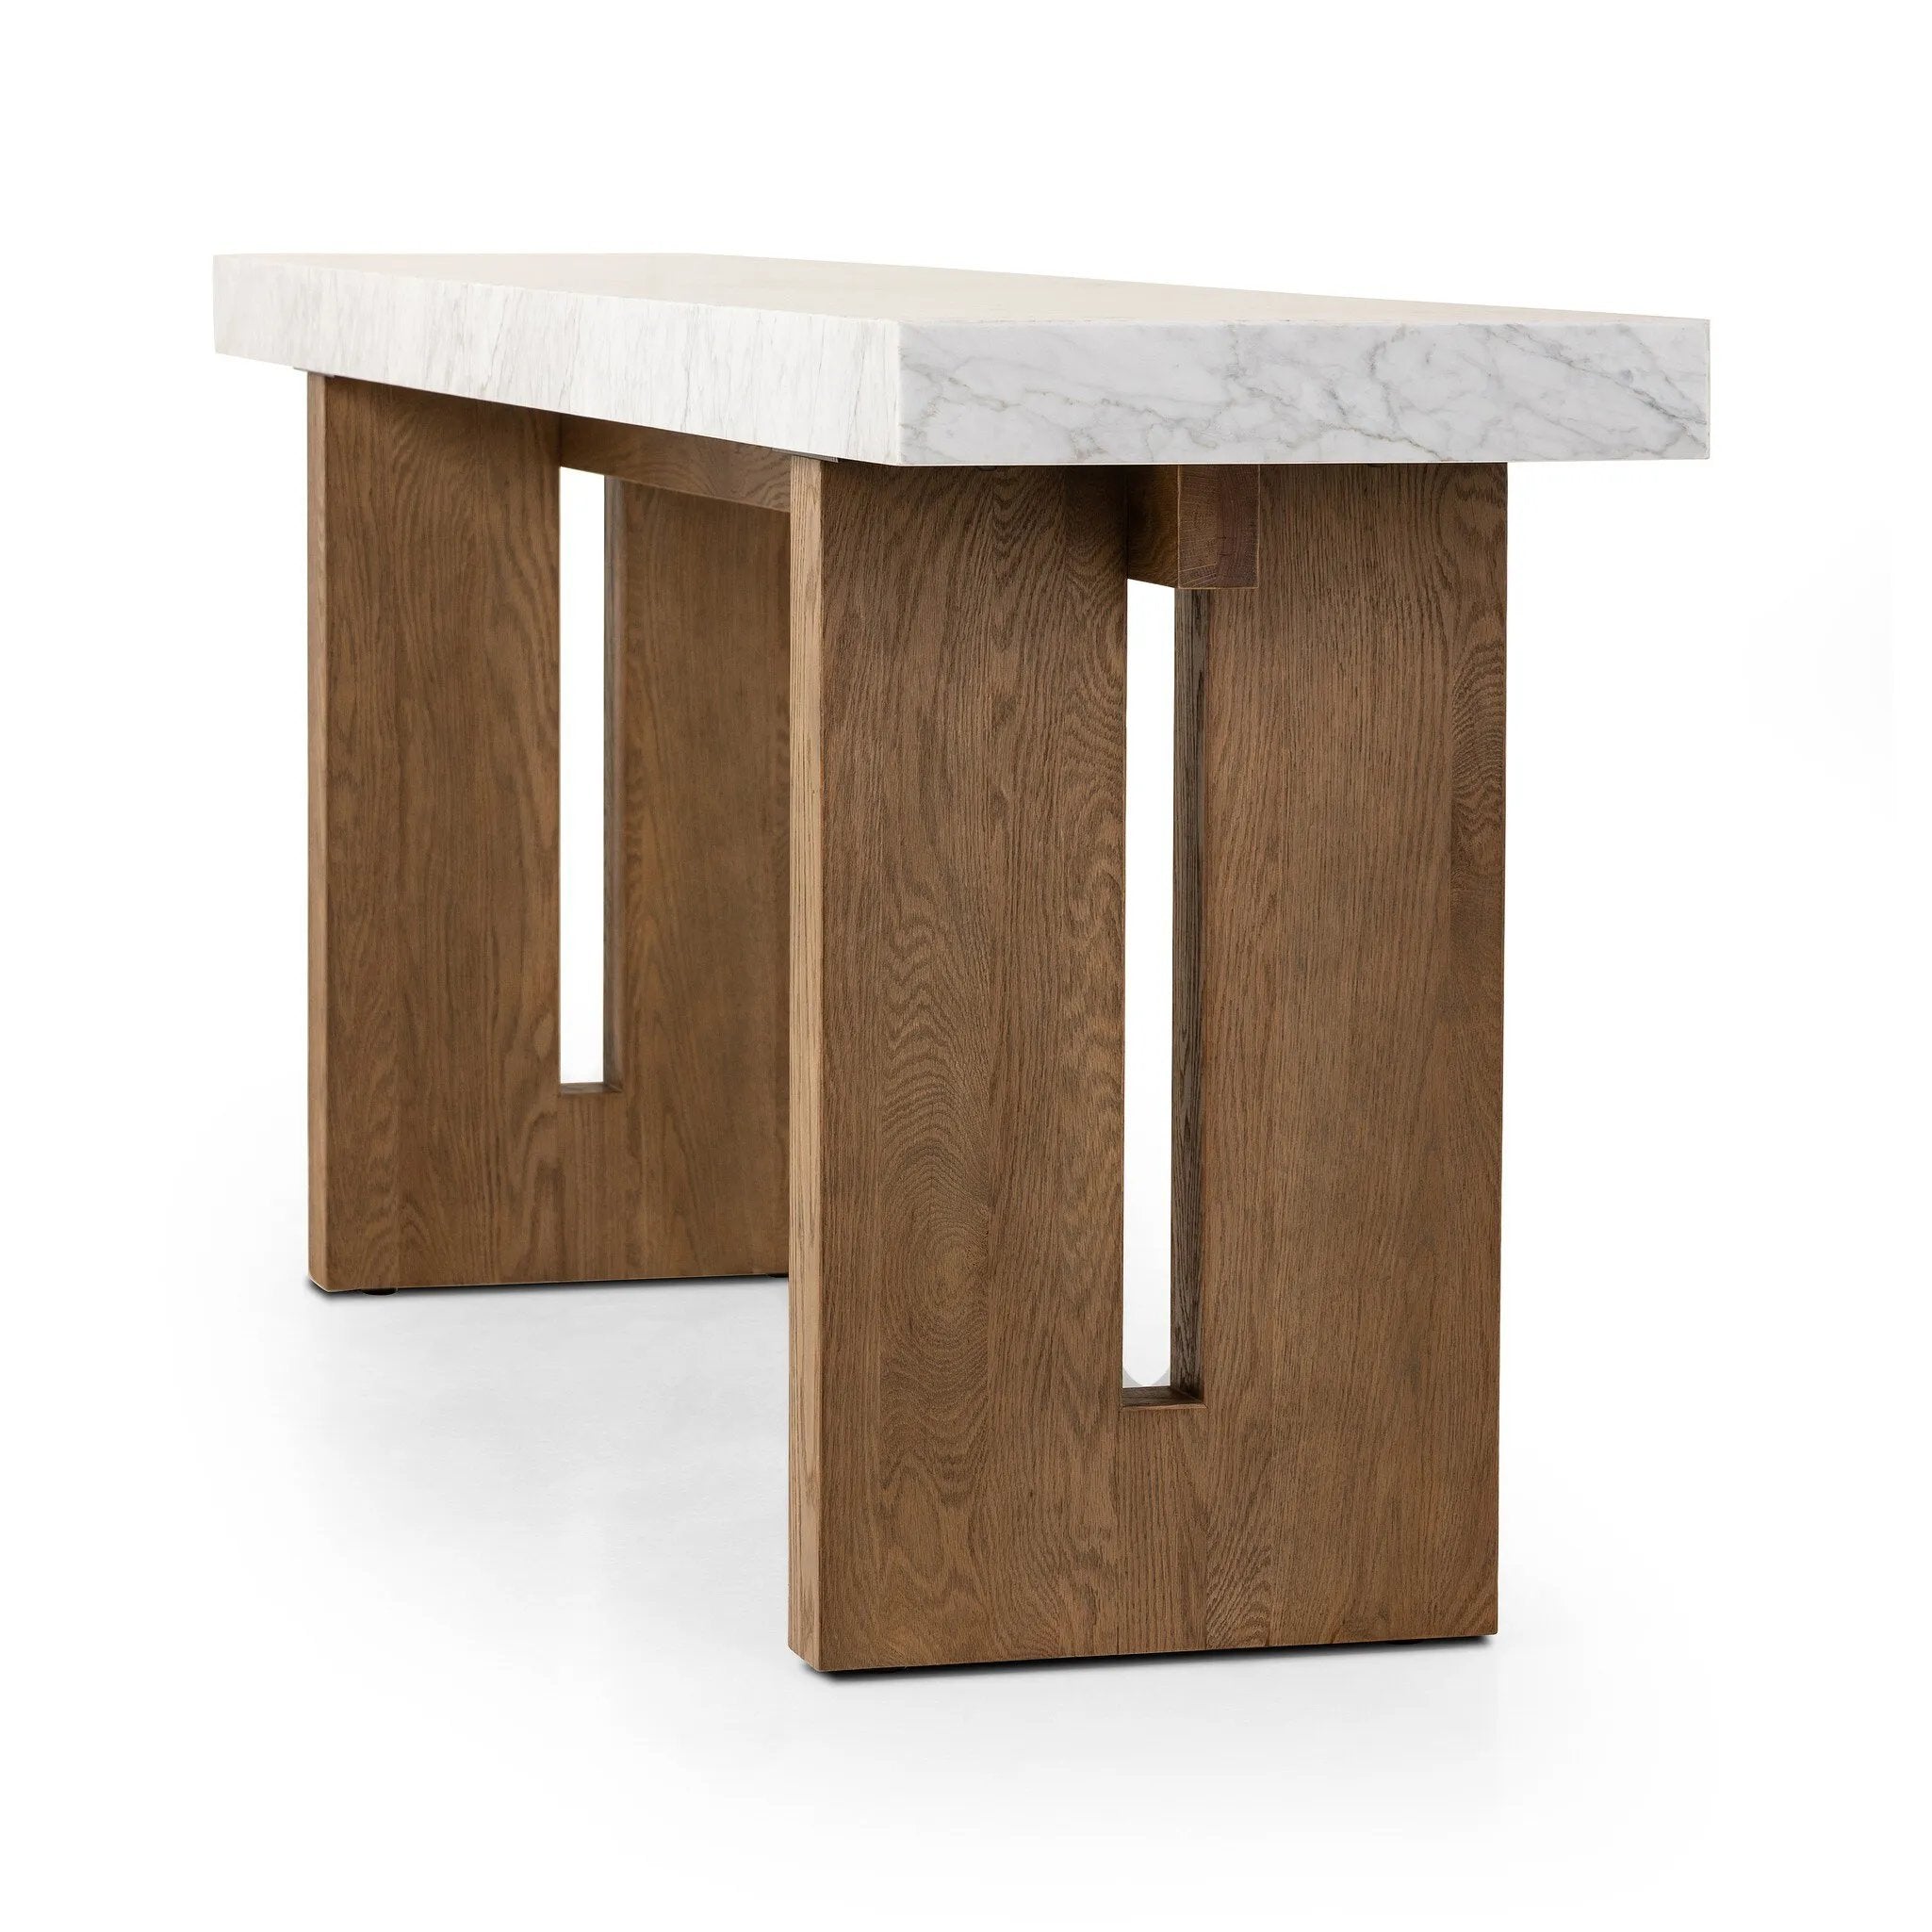 Structured and geometric, an open-style console table pairs smoked oak veneer with white marble, for a sophisticated material mix.Collection: Hughe Amethyst Home provides interior design, new home construction design consulting, vintage area rugs, and lighting in the Charlotte metro area.